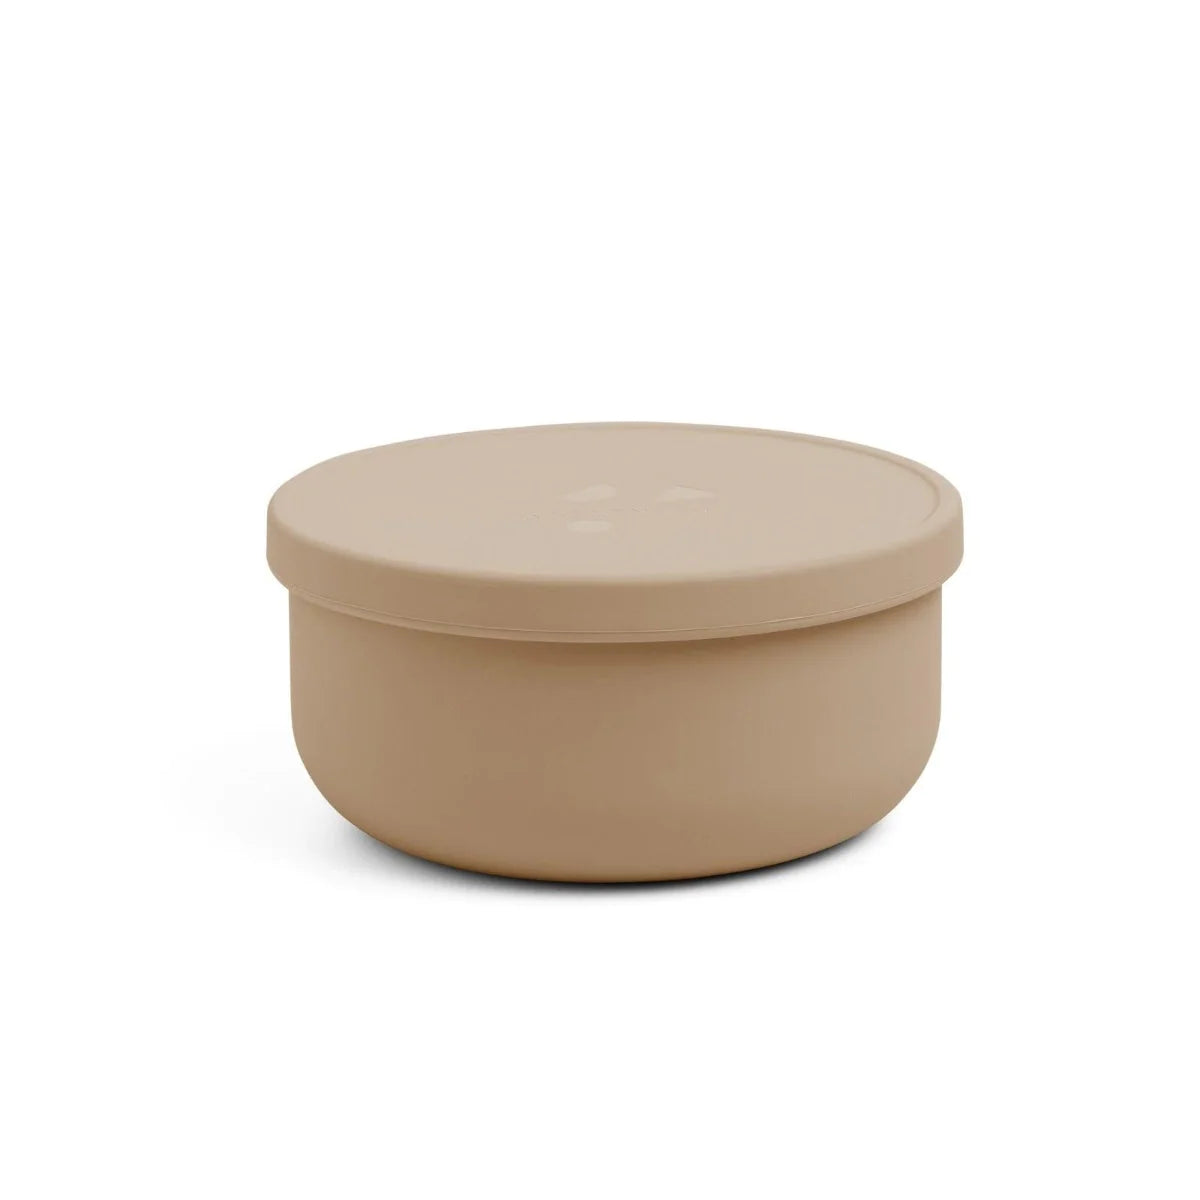 Stevie Bowl- Maison Rue - Toddler bowl with lid